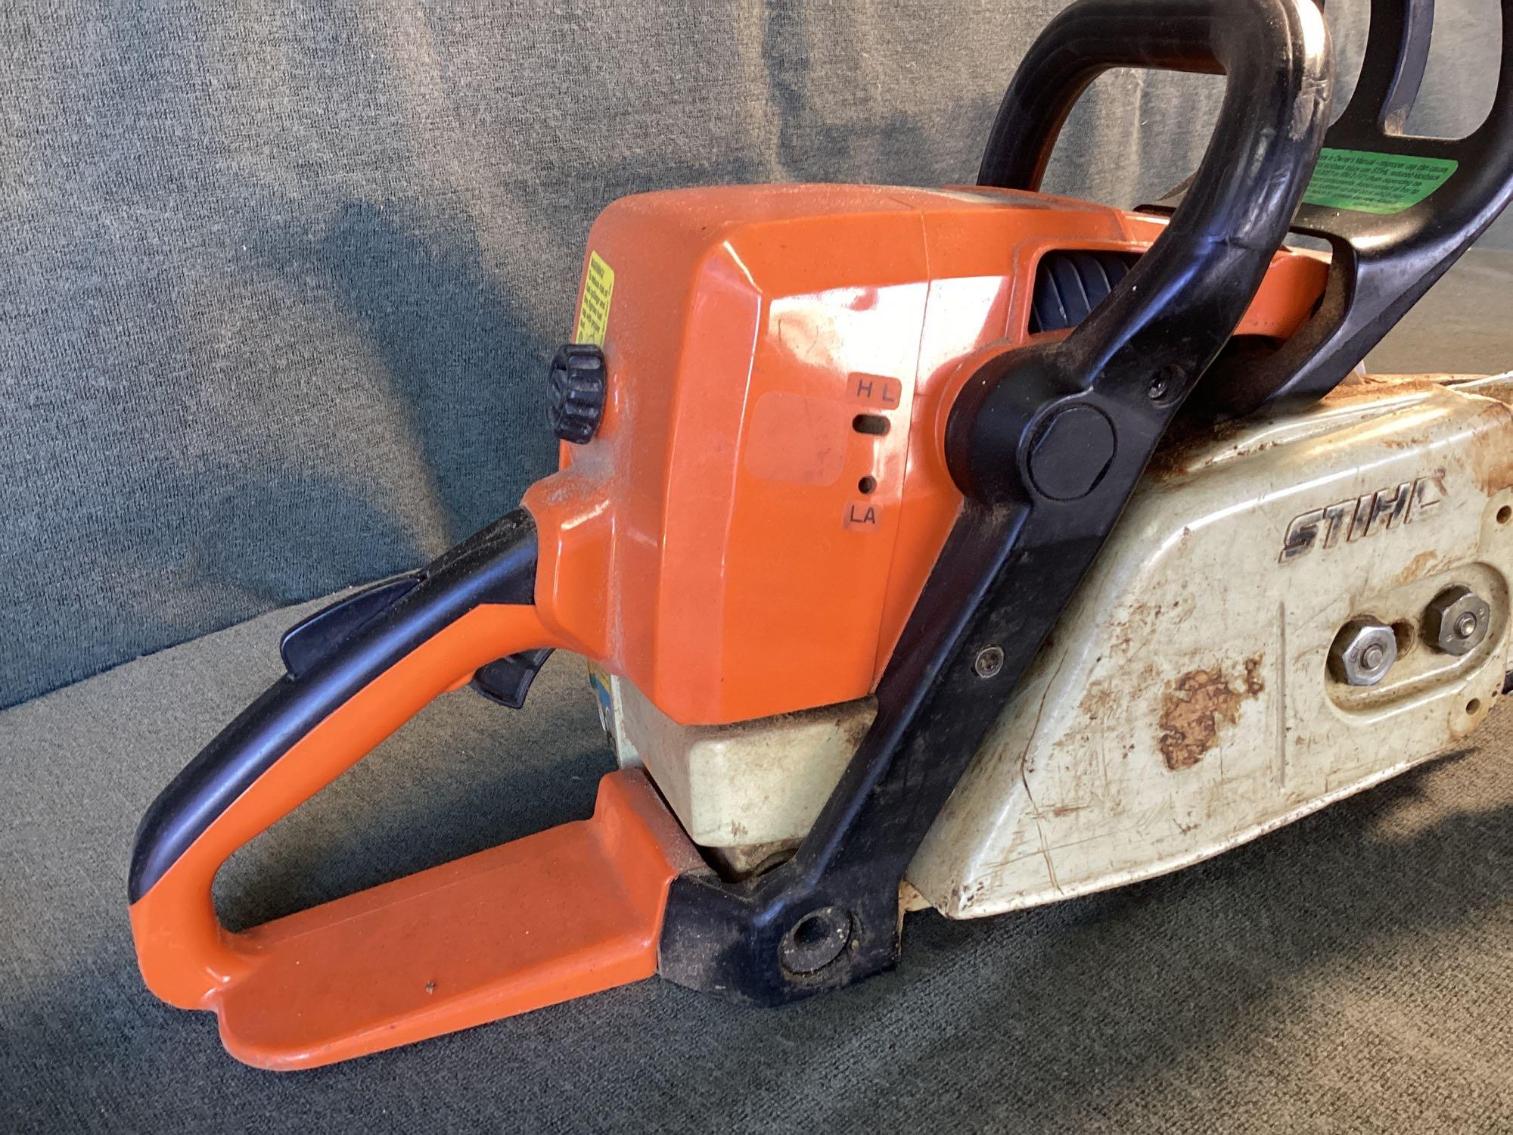 Image for Stihl 029 20” Chain Saw